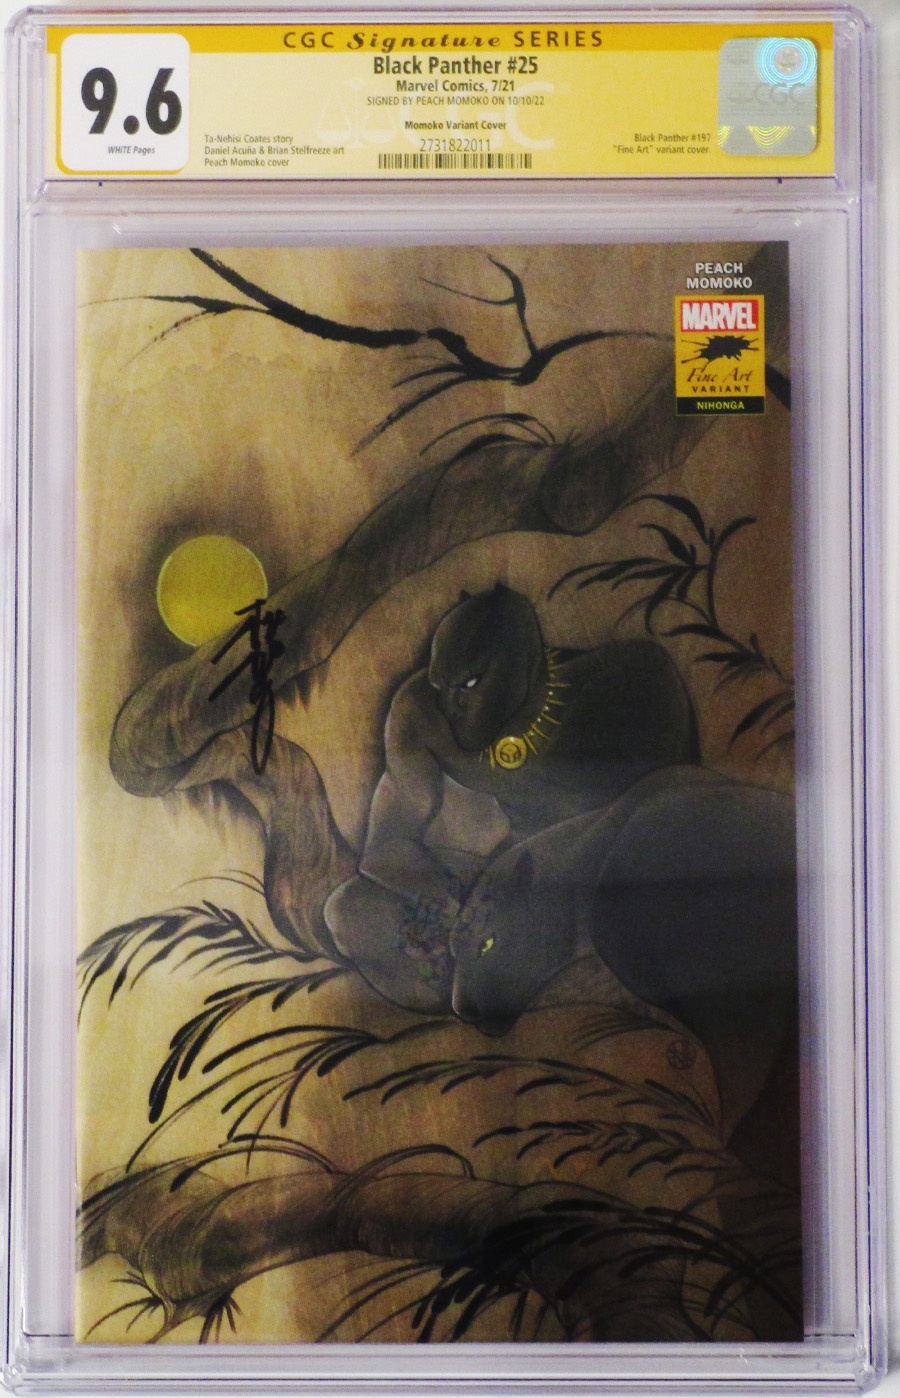 Black Panther Vol 7 #25 Cover M Variant Peach Momoko Stormbreakers Cover Signed by Peach Momoko CGC Graded 9.6